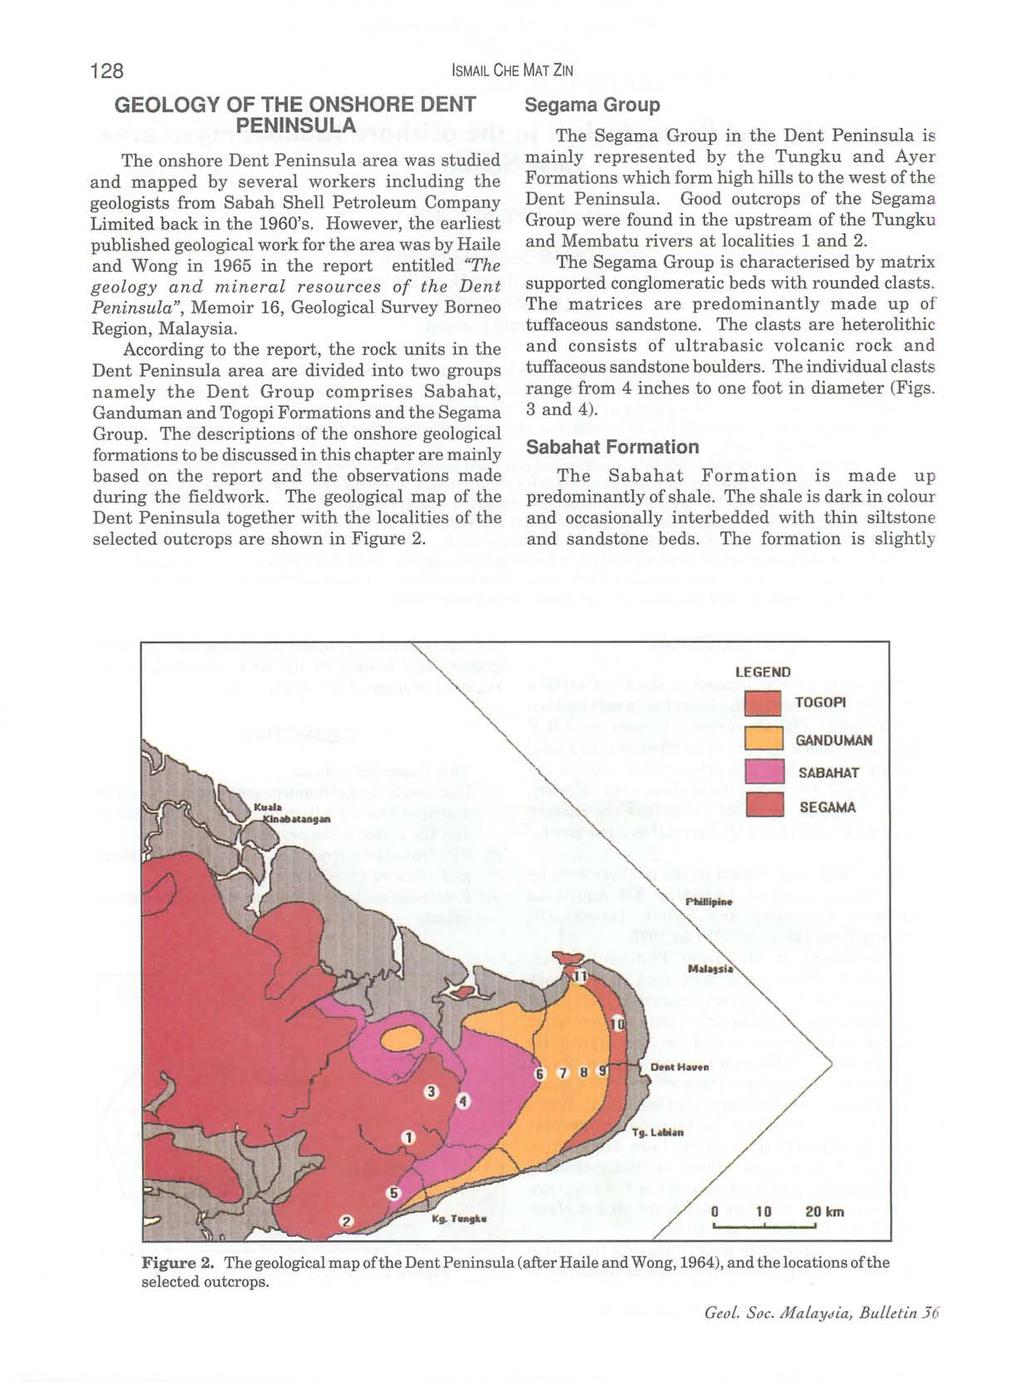 128 ISMAIL CHE MAT ZIN GEOLOGY OF THE ONSHORE DENT PENINSULA The onshore Dent Peninsula area was studied and mapped by several workers including the geologists from Sabah Shell Petroleum Company